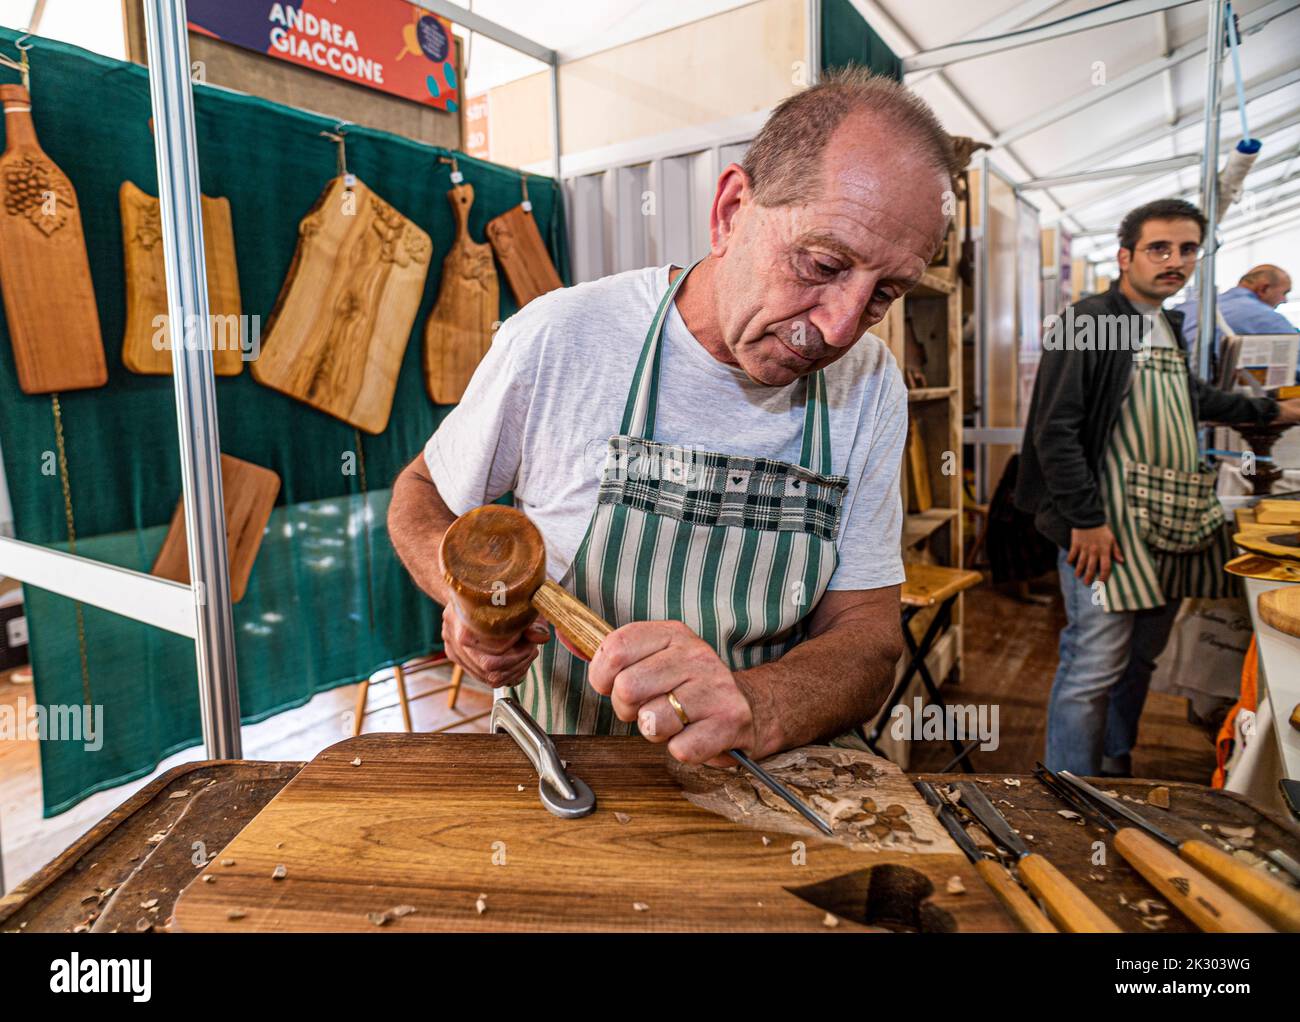 Italie. 23rd septembre 2022. Italie Turin Parco Dora 'Terra Madre - Salone del Gusto 2022' - Piémont Pamparato carver. Bois, artisan crédit: Realy Easy Star/Alamy Live News Banque D'Images